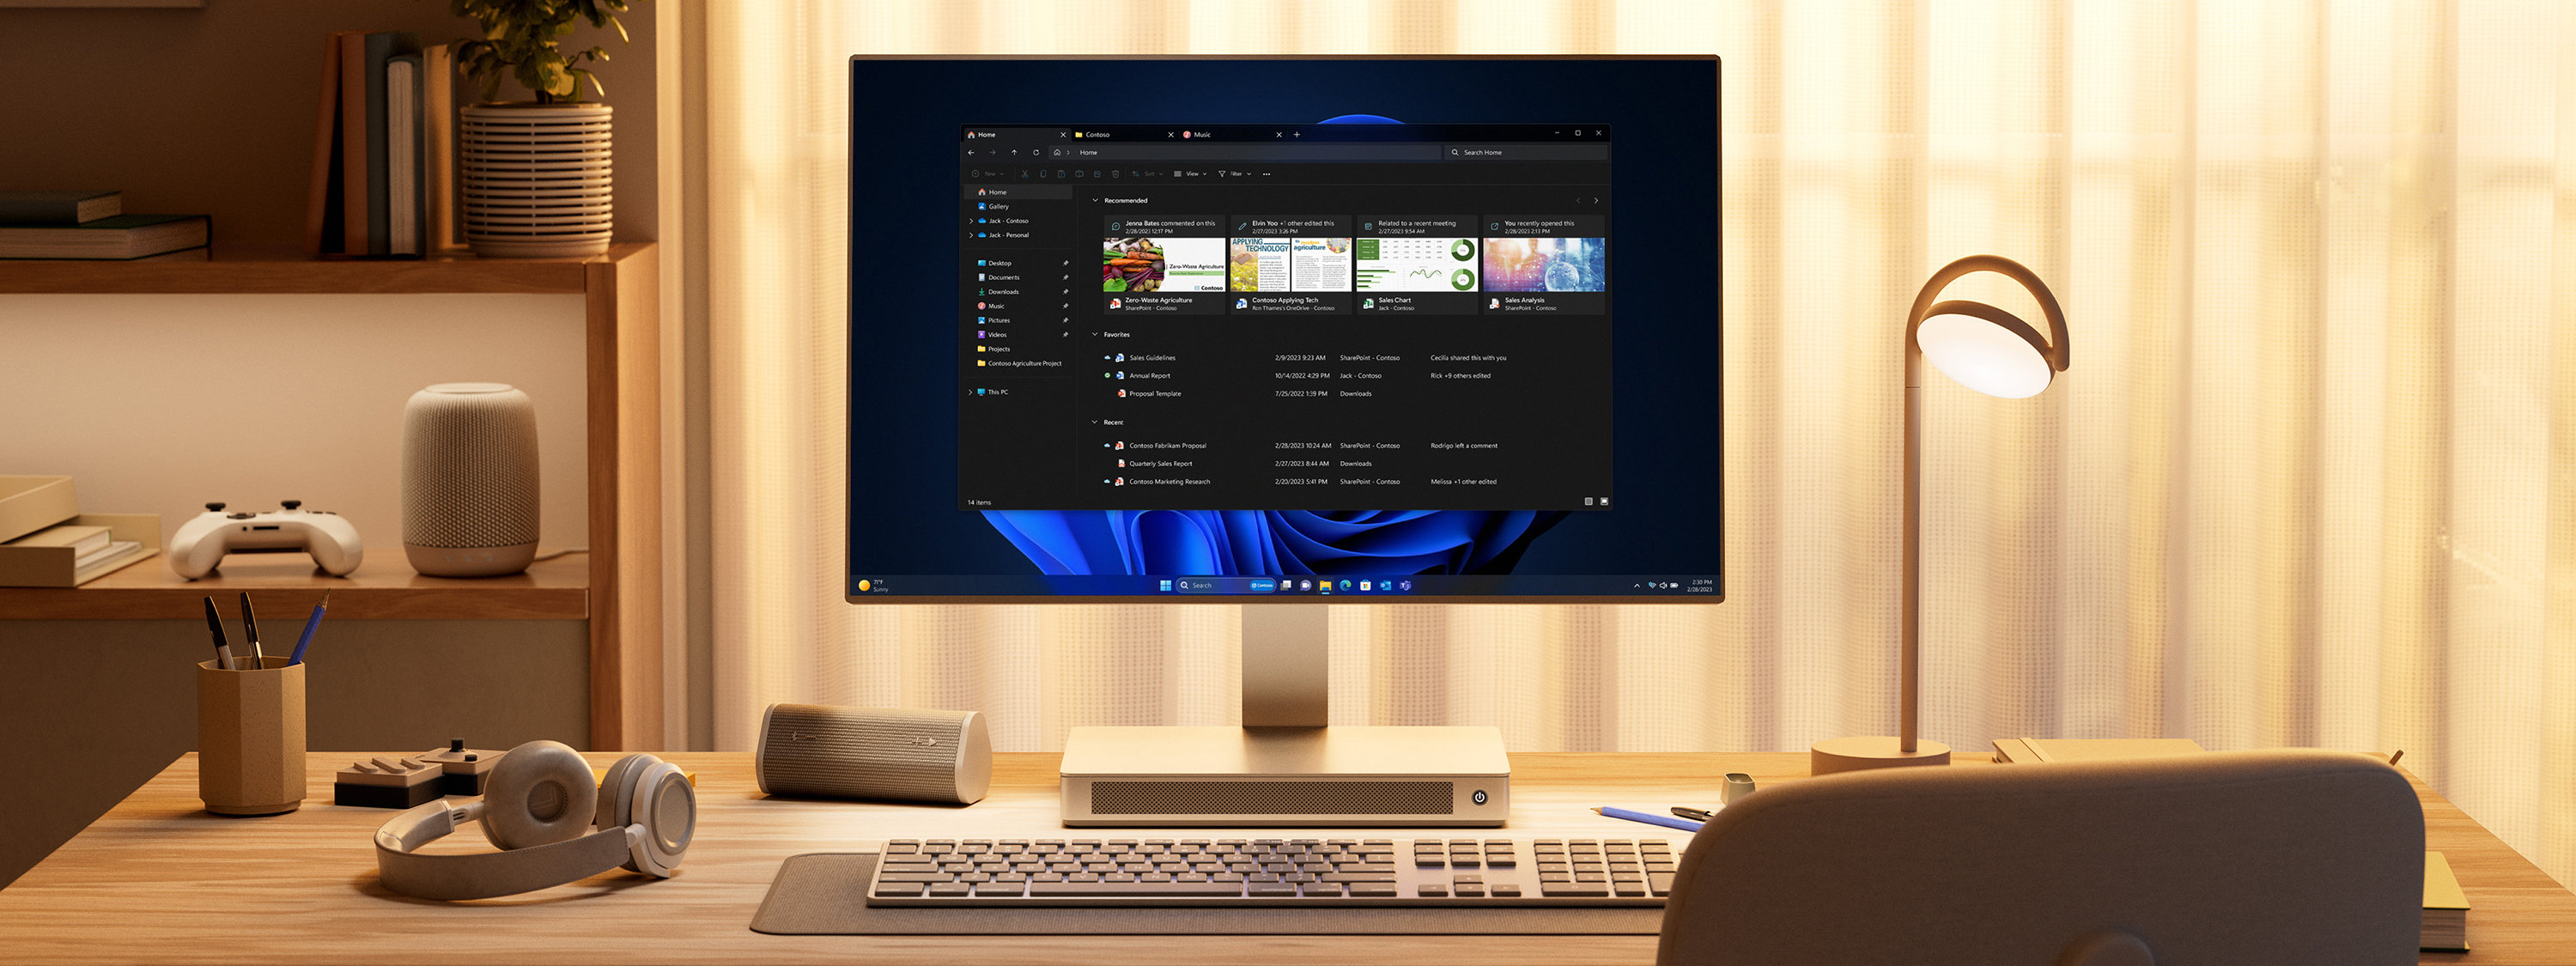 Home office with desk, keyboard and all in one desktop displaying File Explorer window.